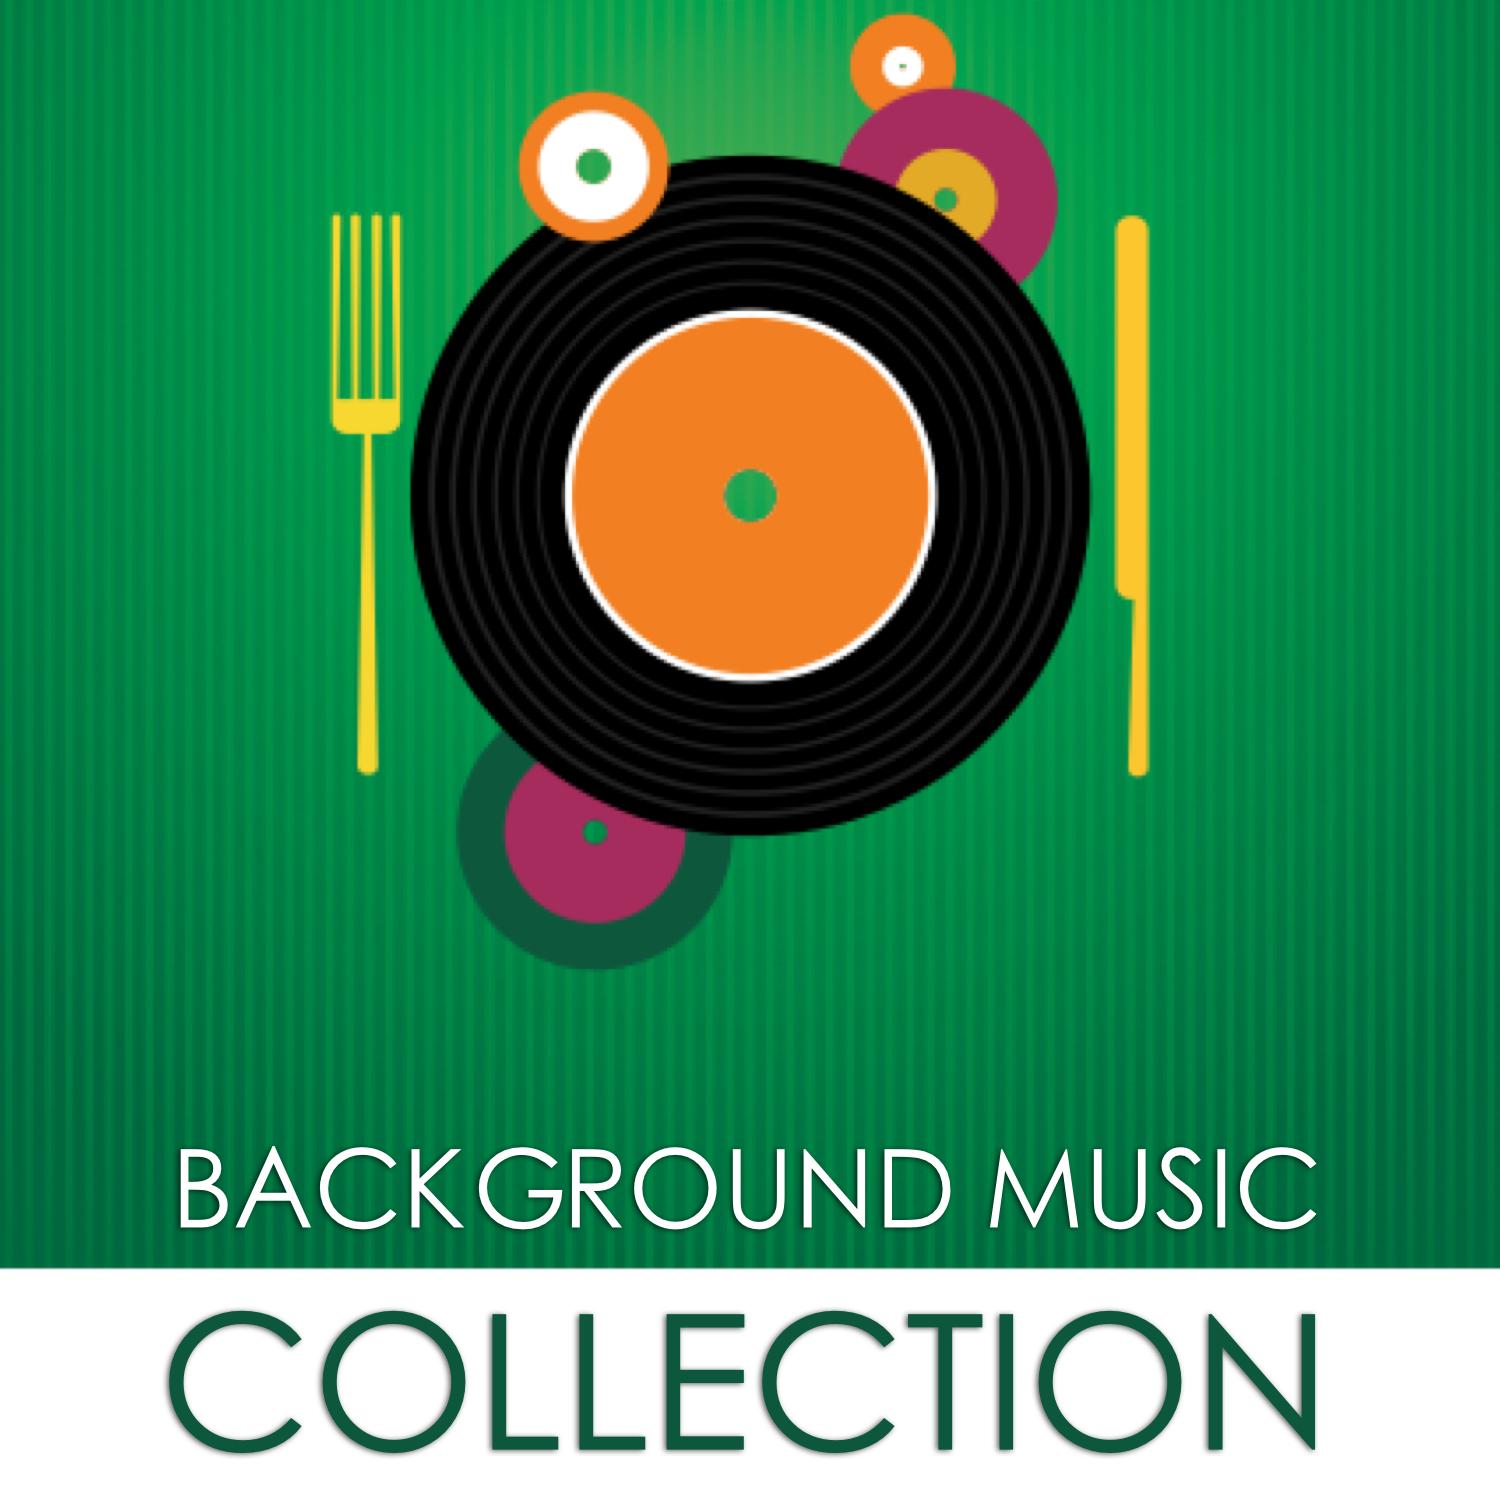 The Background Music Collection